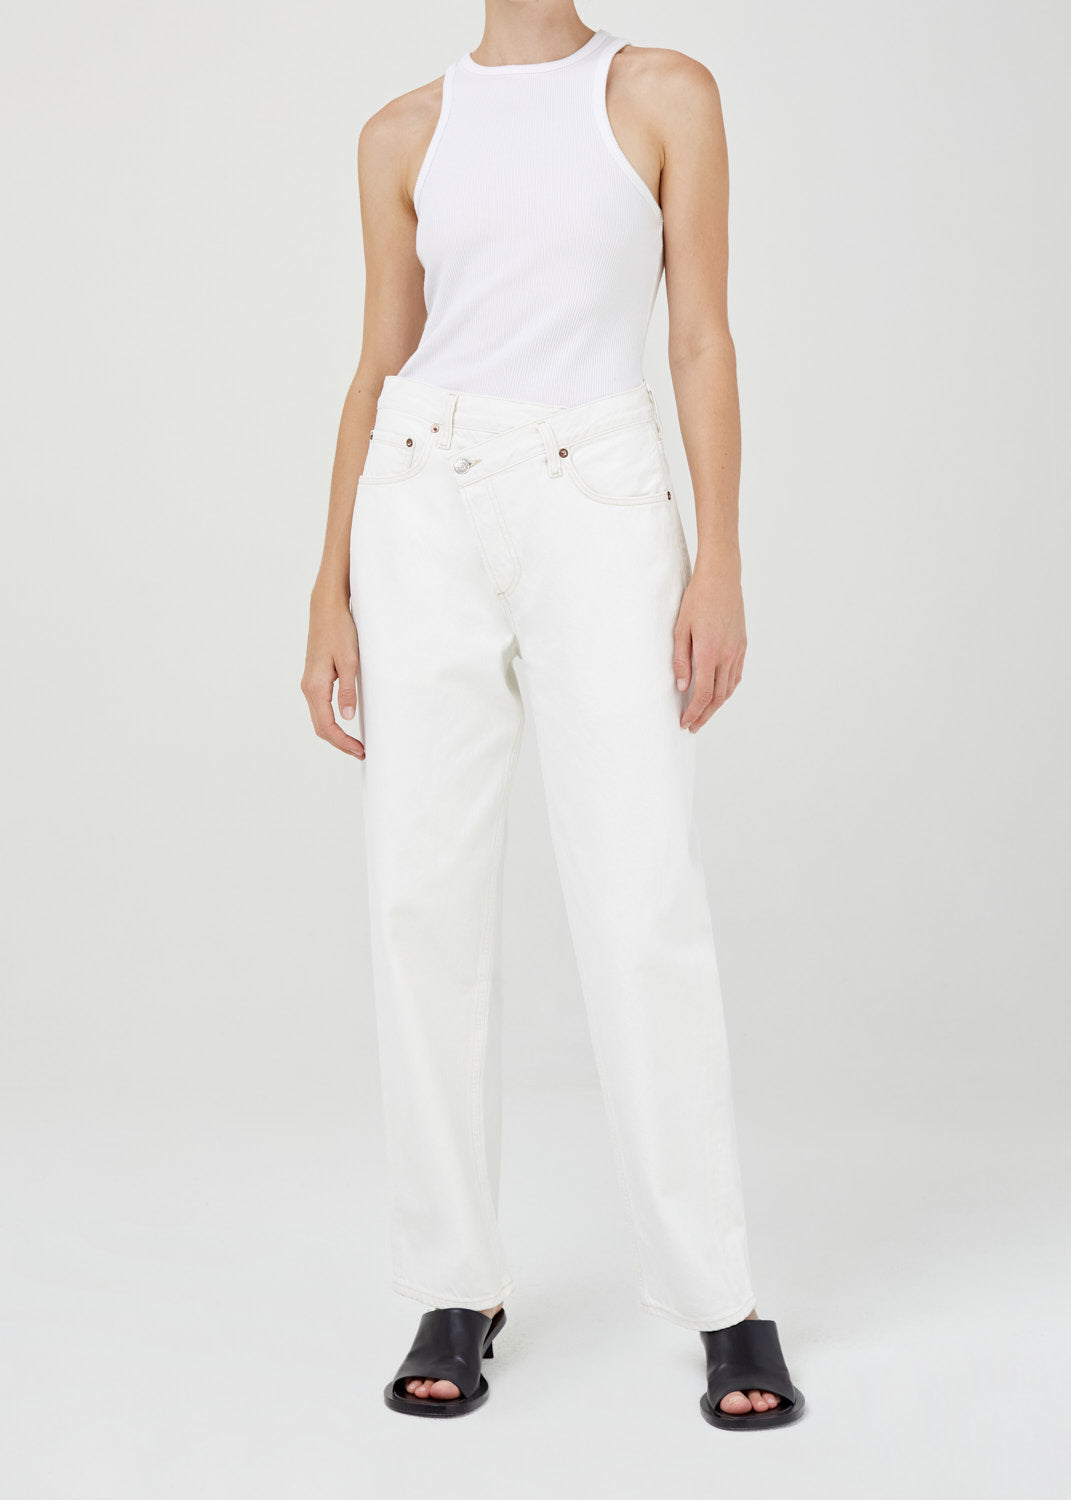 Agolde - Criss Cross Jeans Jeans AGOLDE White 26 